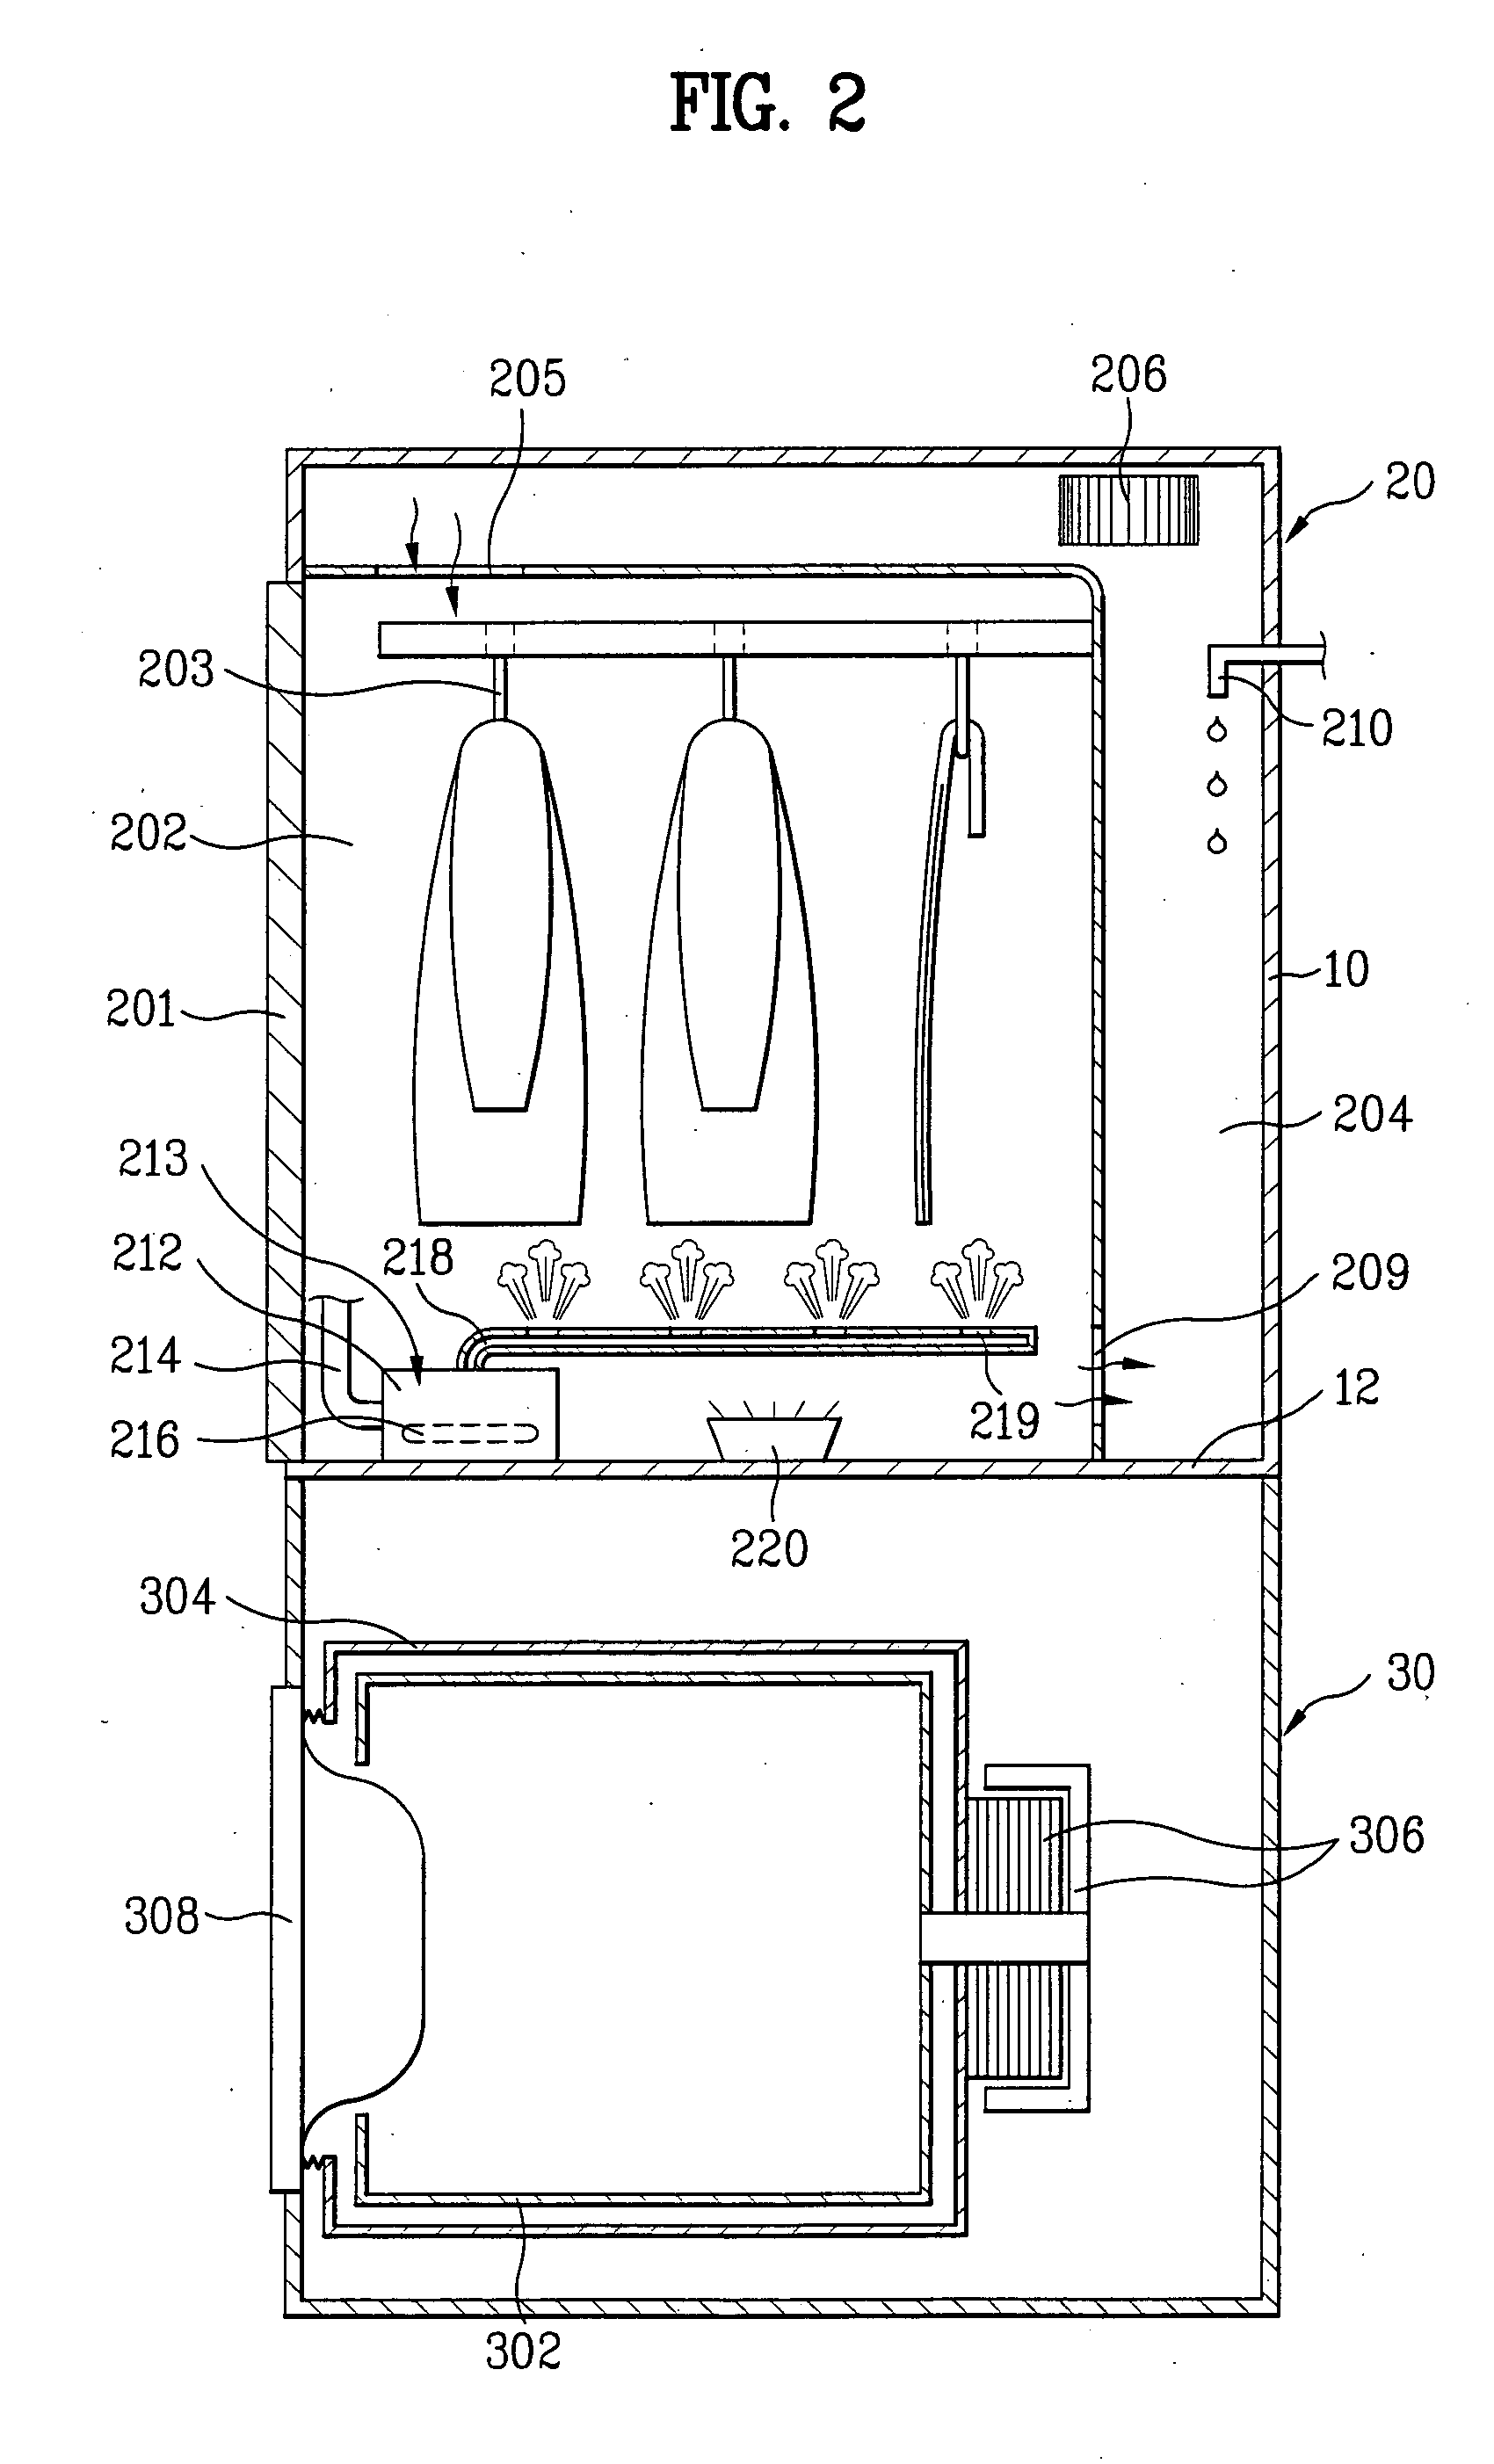 Multi-functional laundry device and controlling method for the same